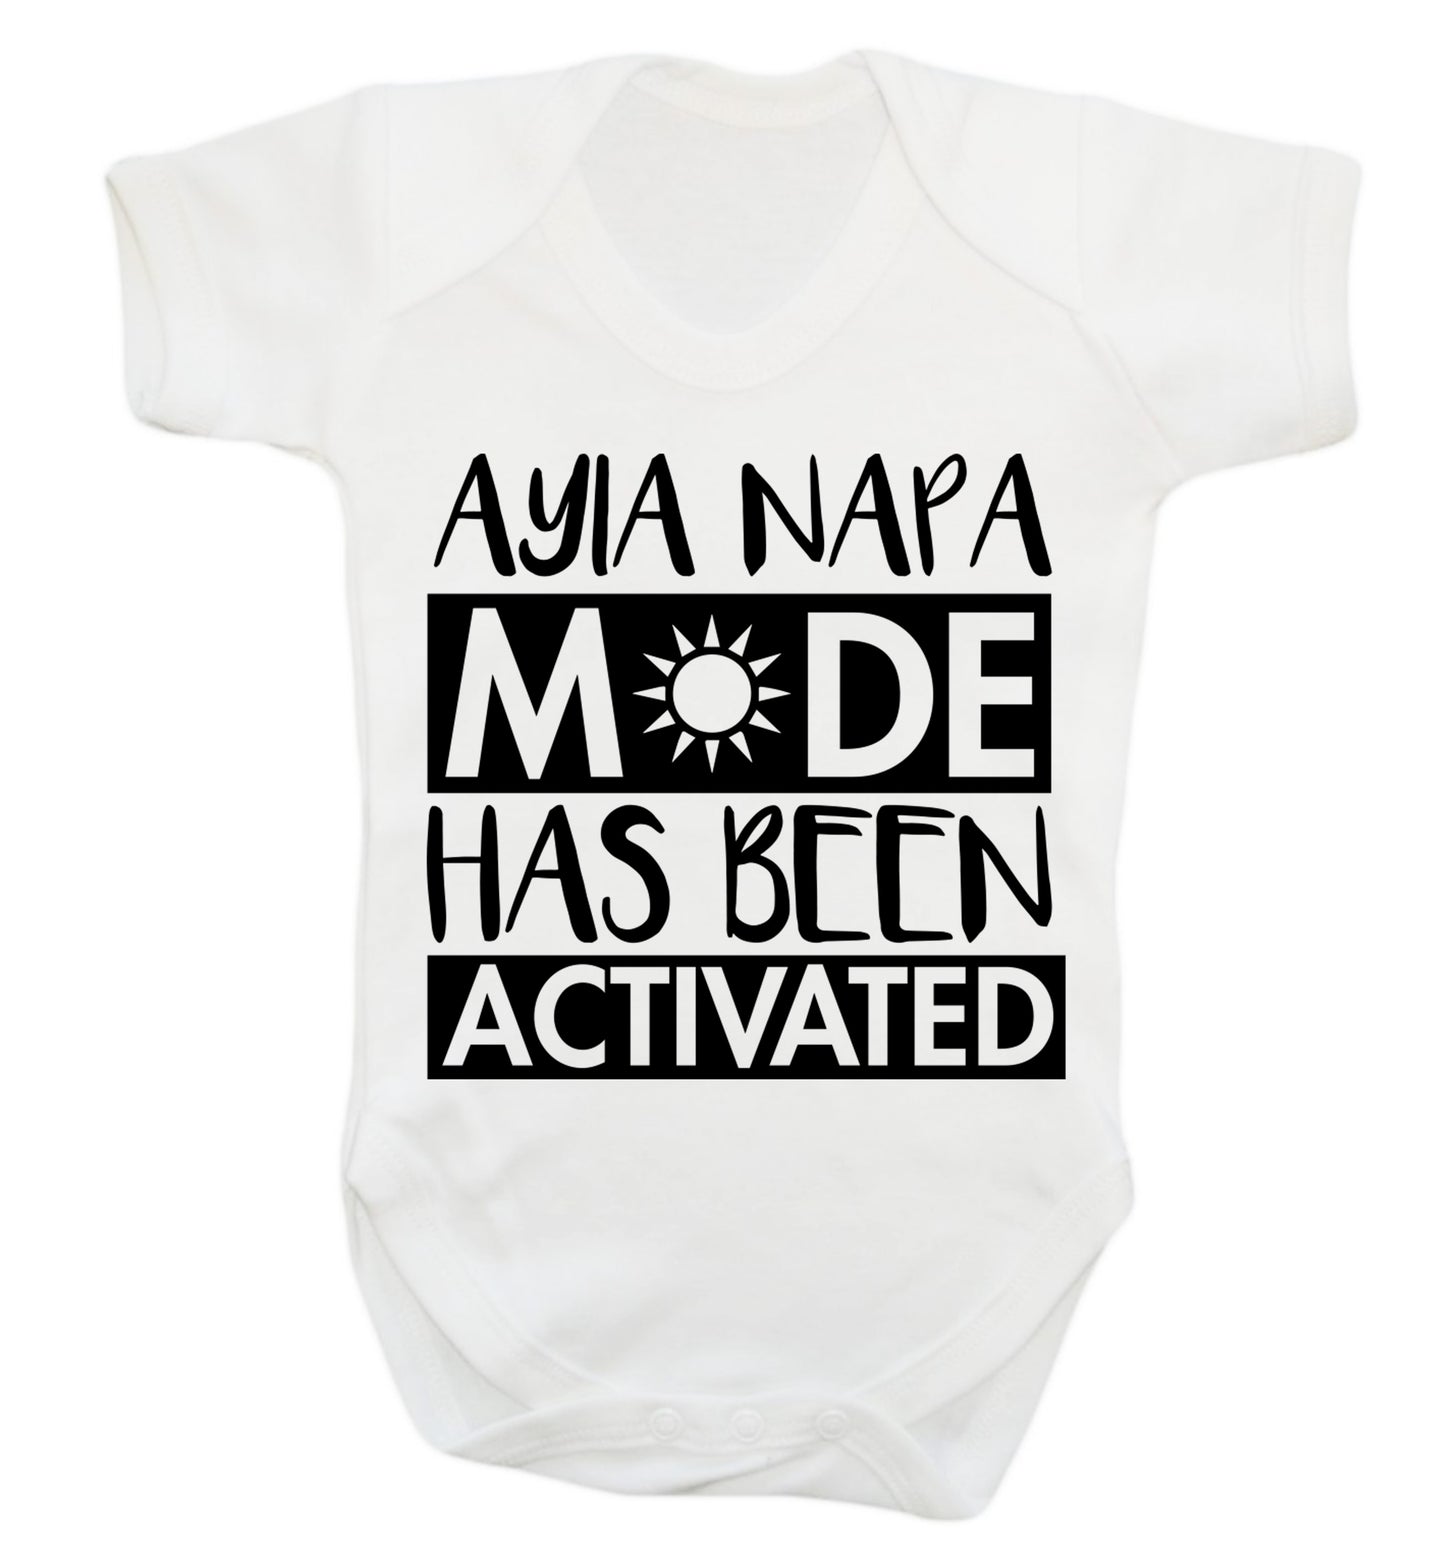 Ayia Napa mode has been activated Baby Vest white 18-24 months